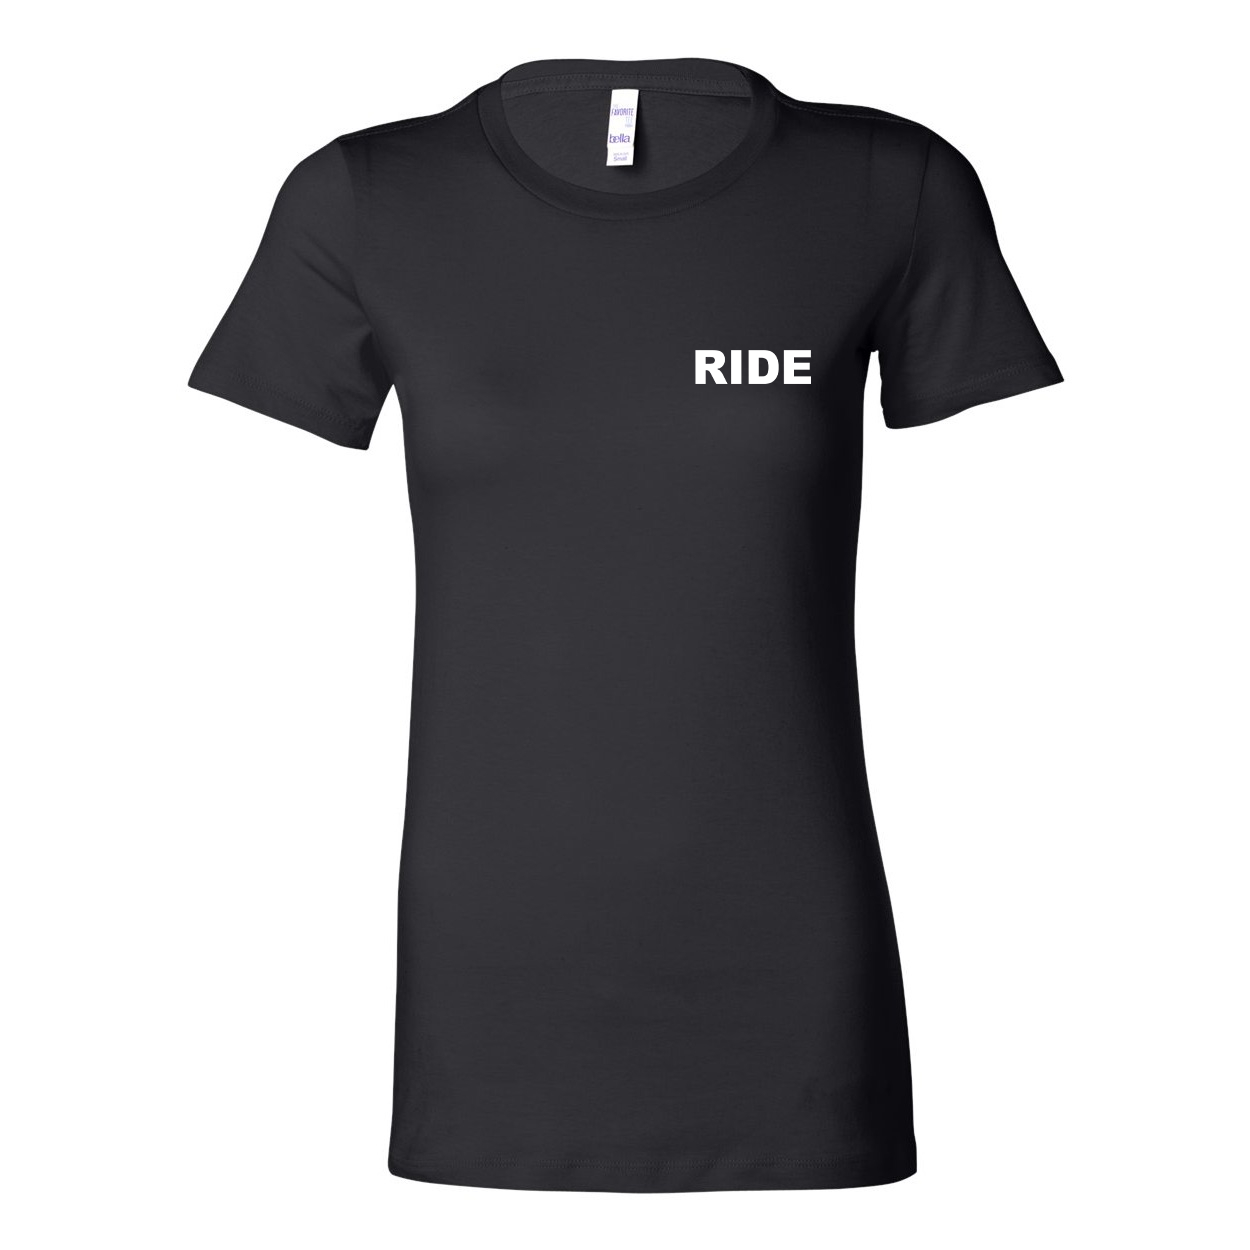 Ride Brand Logo Women's Night Out Fitted Tri-Blend T-Shirt Black (White Logo)